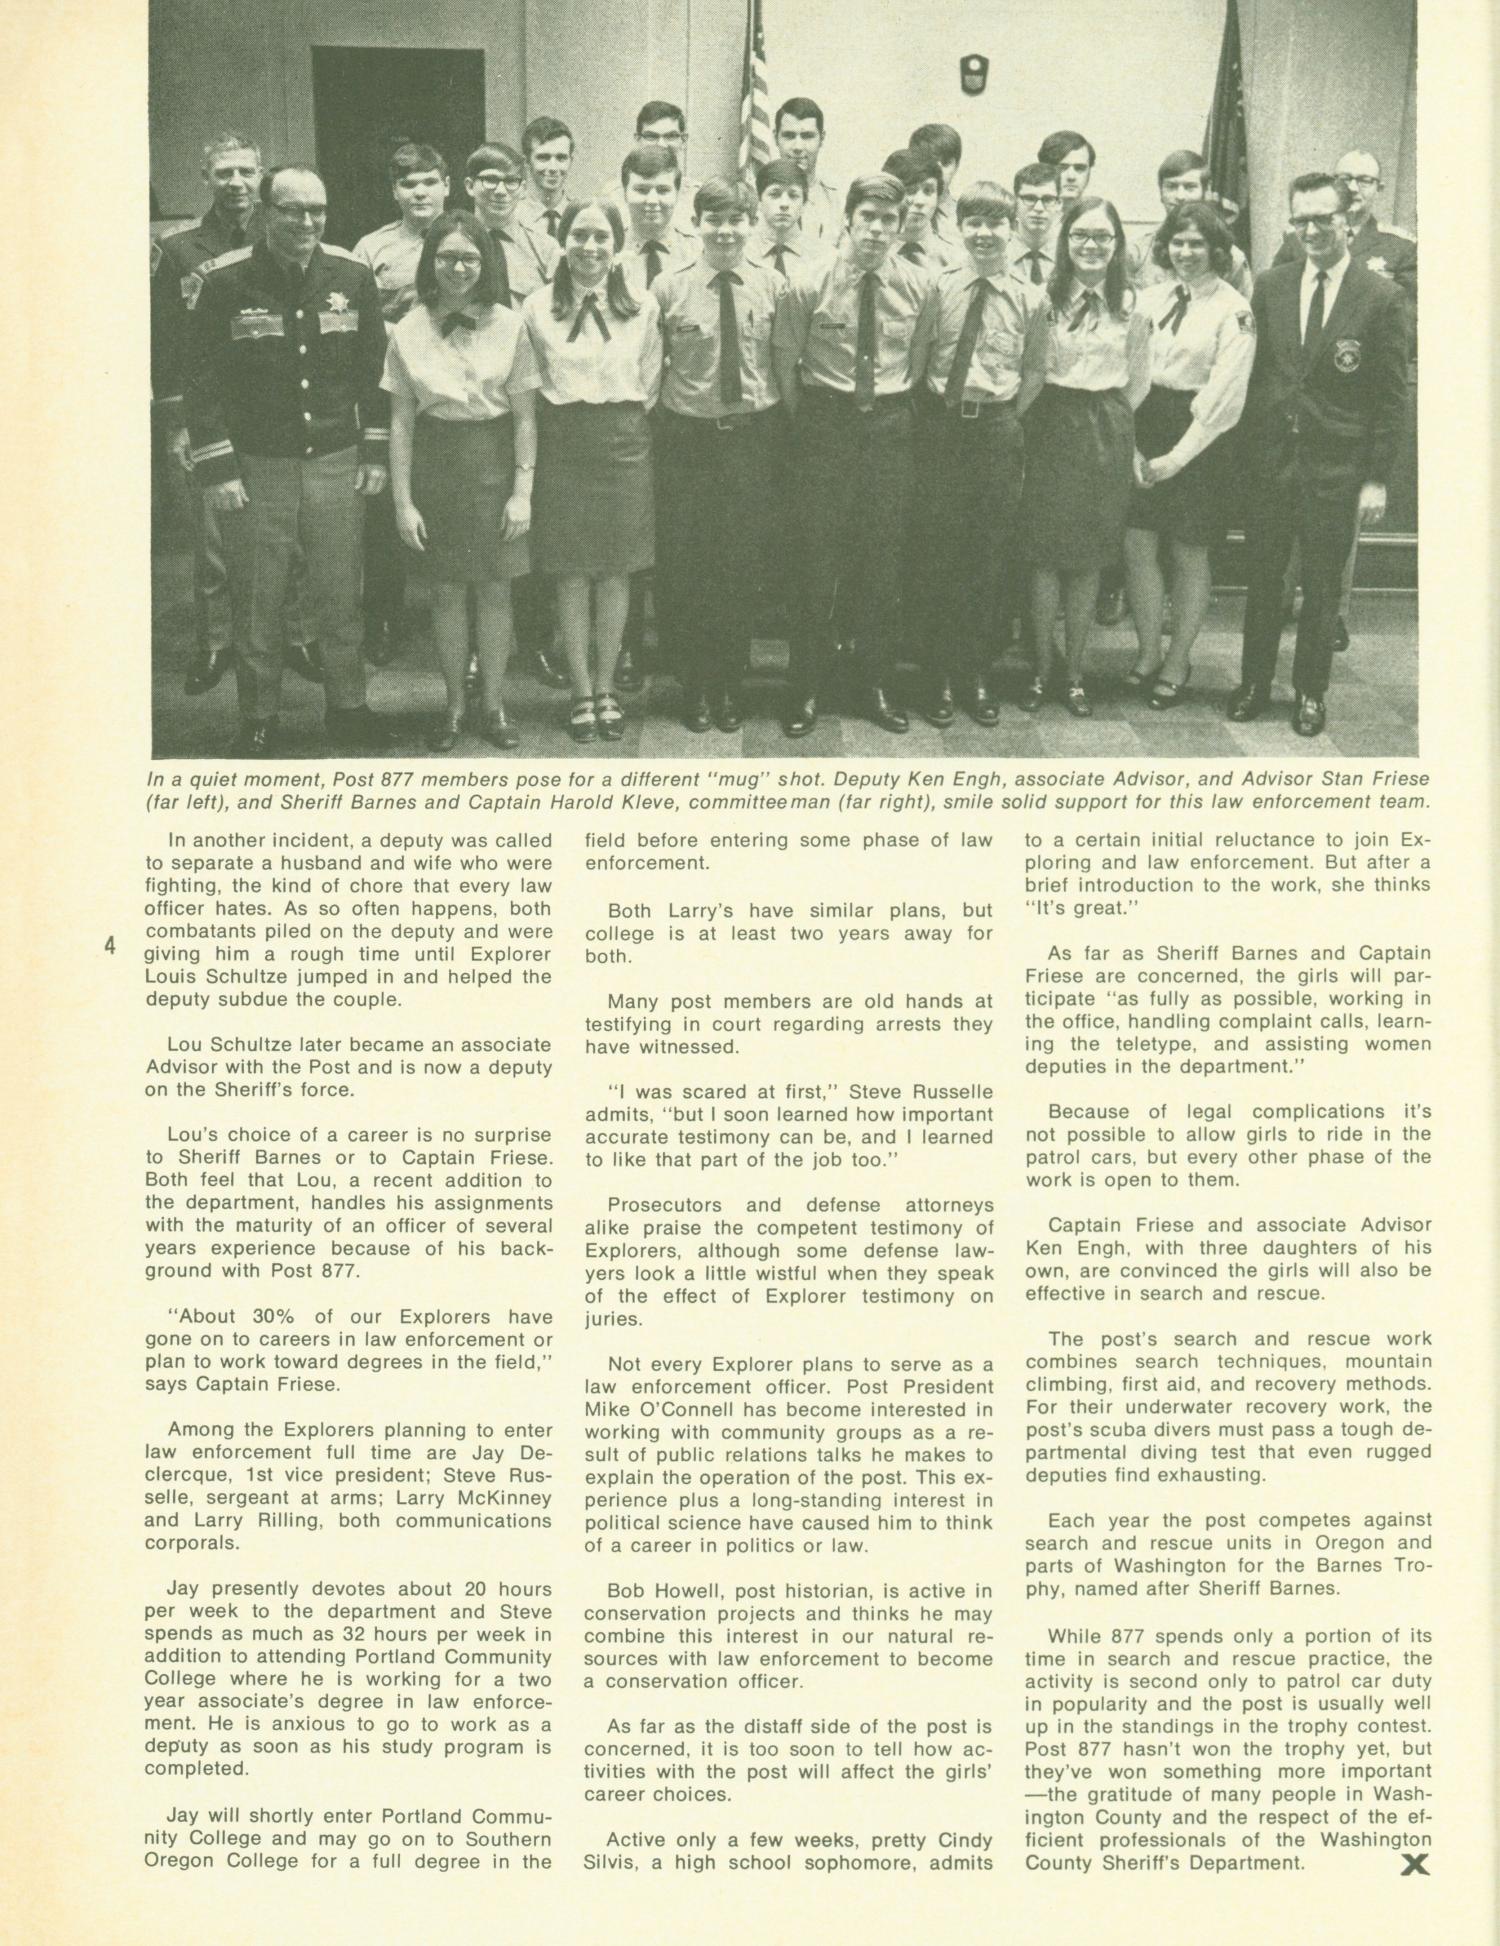 Scouting, Volume 59, Number 3, May-June 1971
                                                
                                                    4
                                                